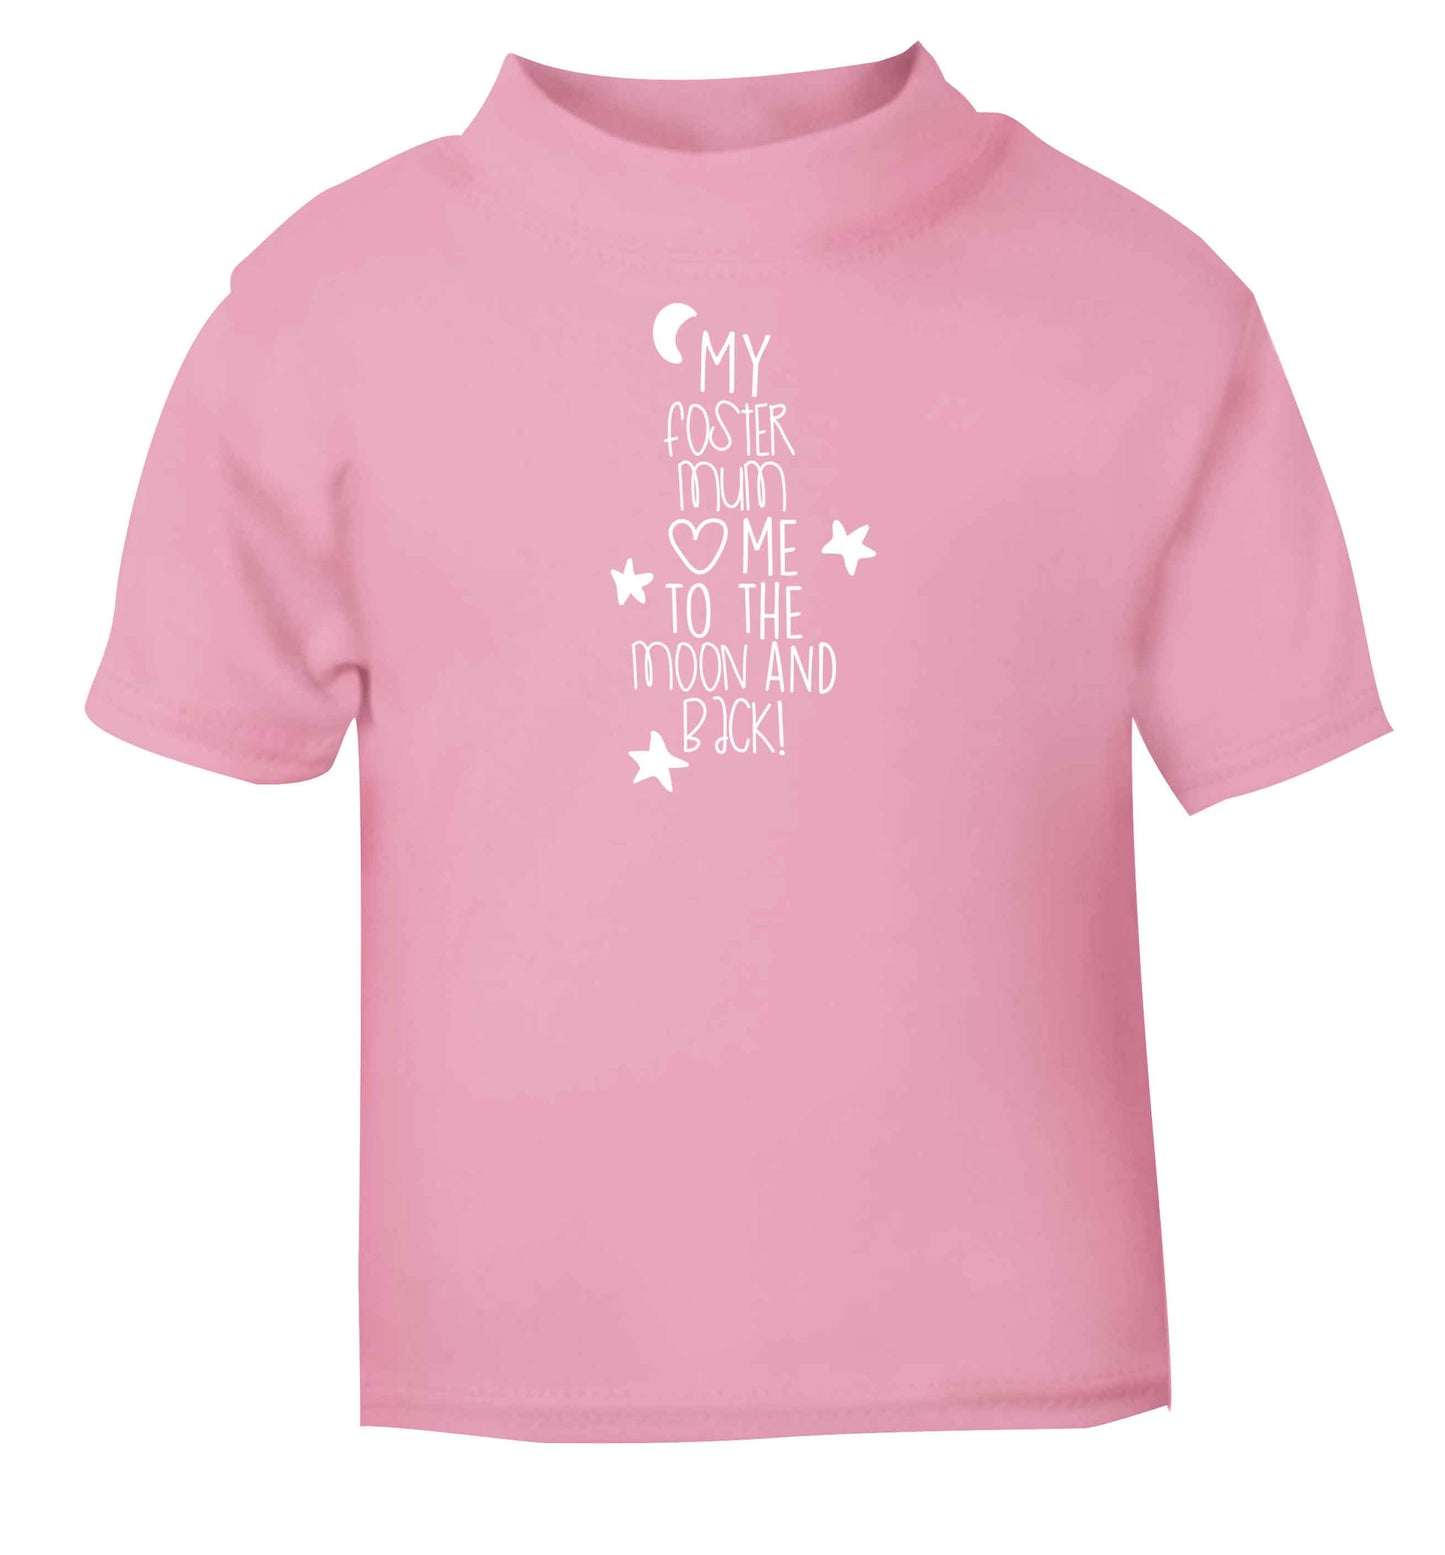 My foster mum loves me to the moon and back Children's light pink Tshirt 12-13 Years